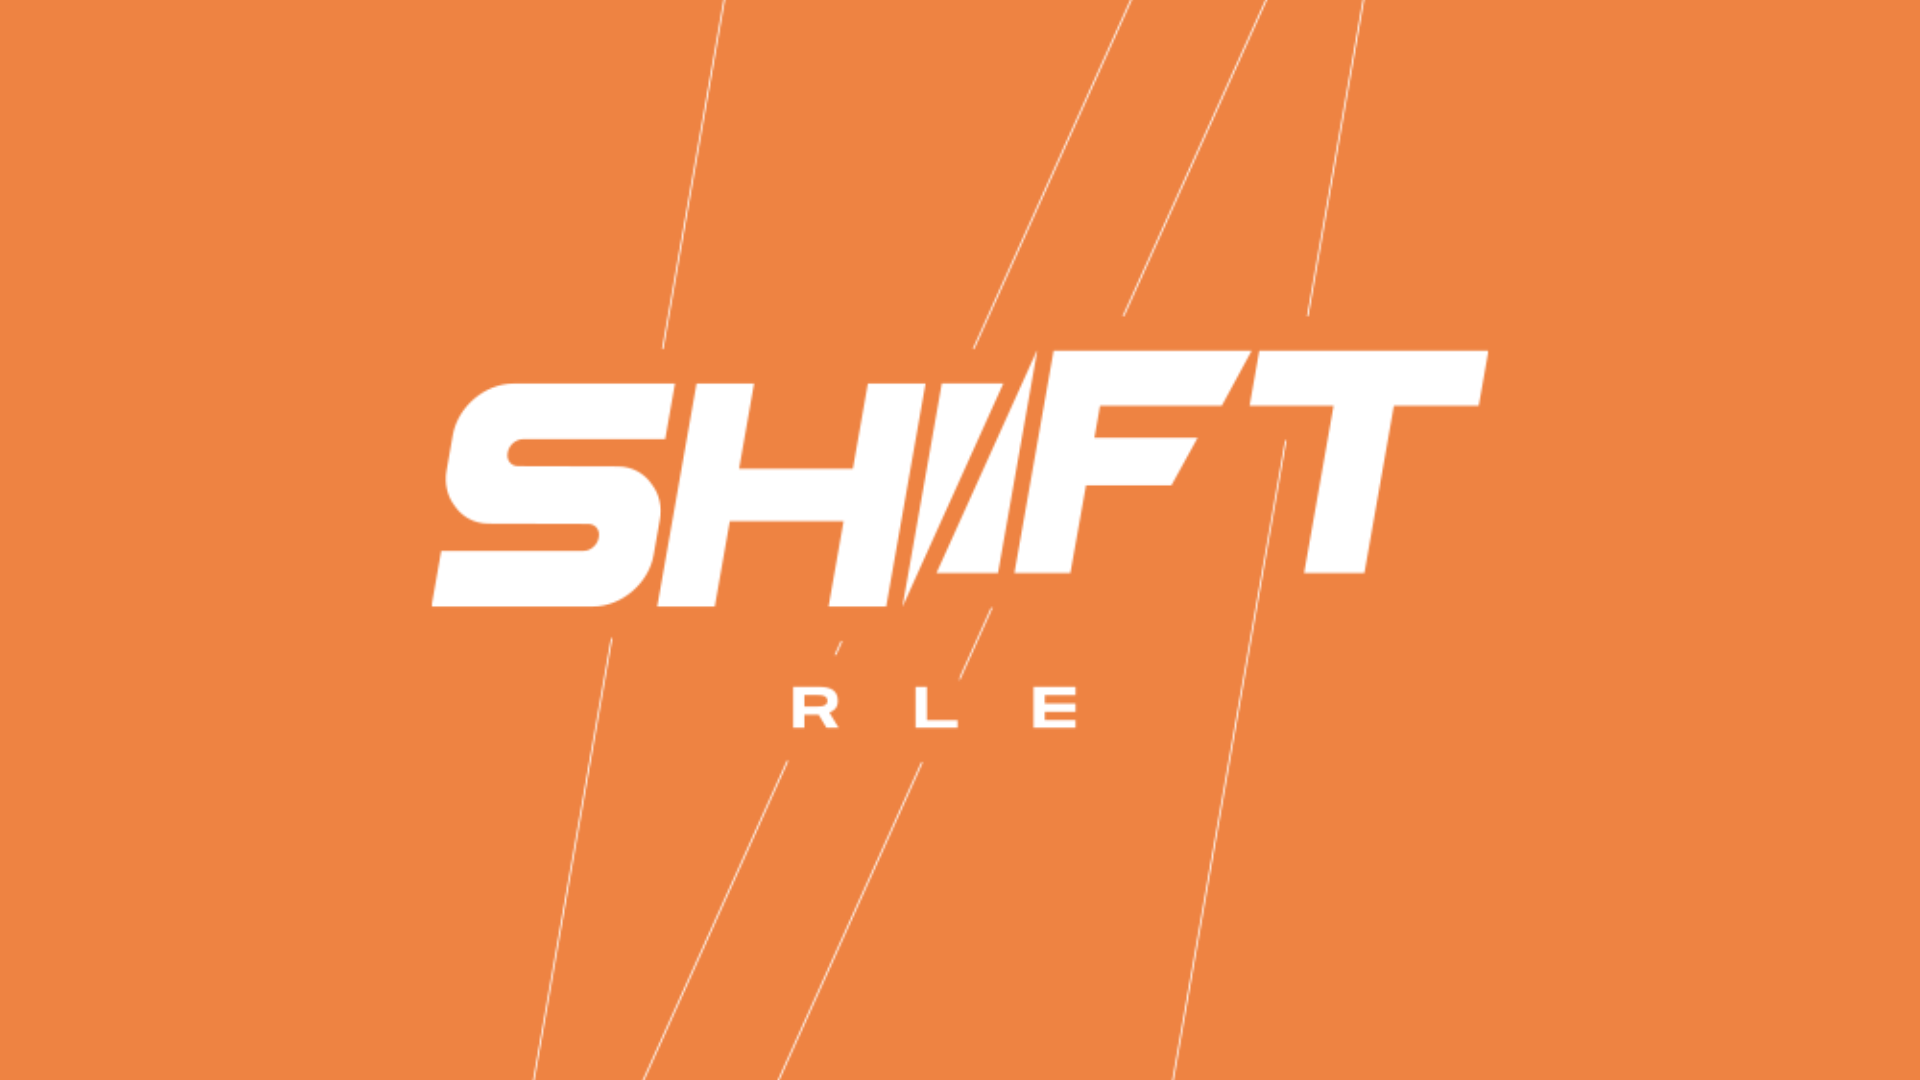 X1 parts ways with recent acquisition ShiftRLE